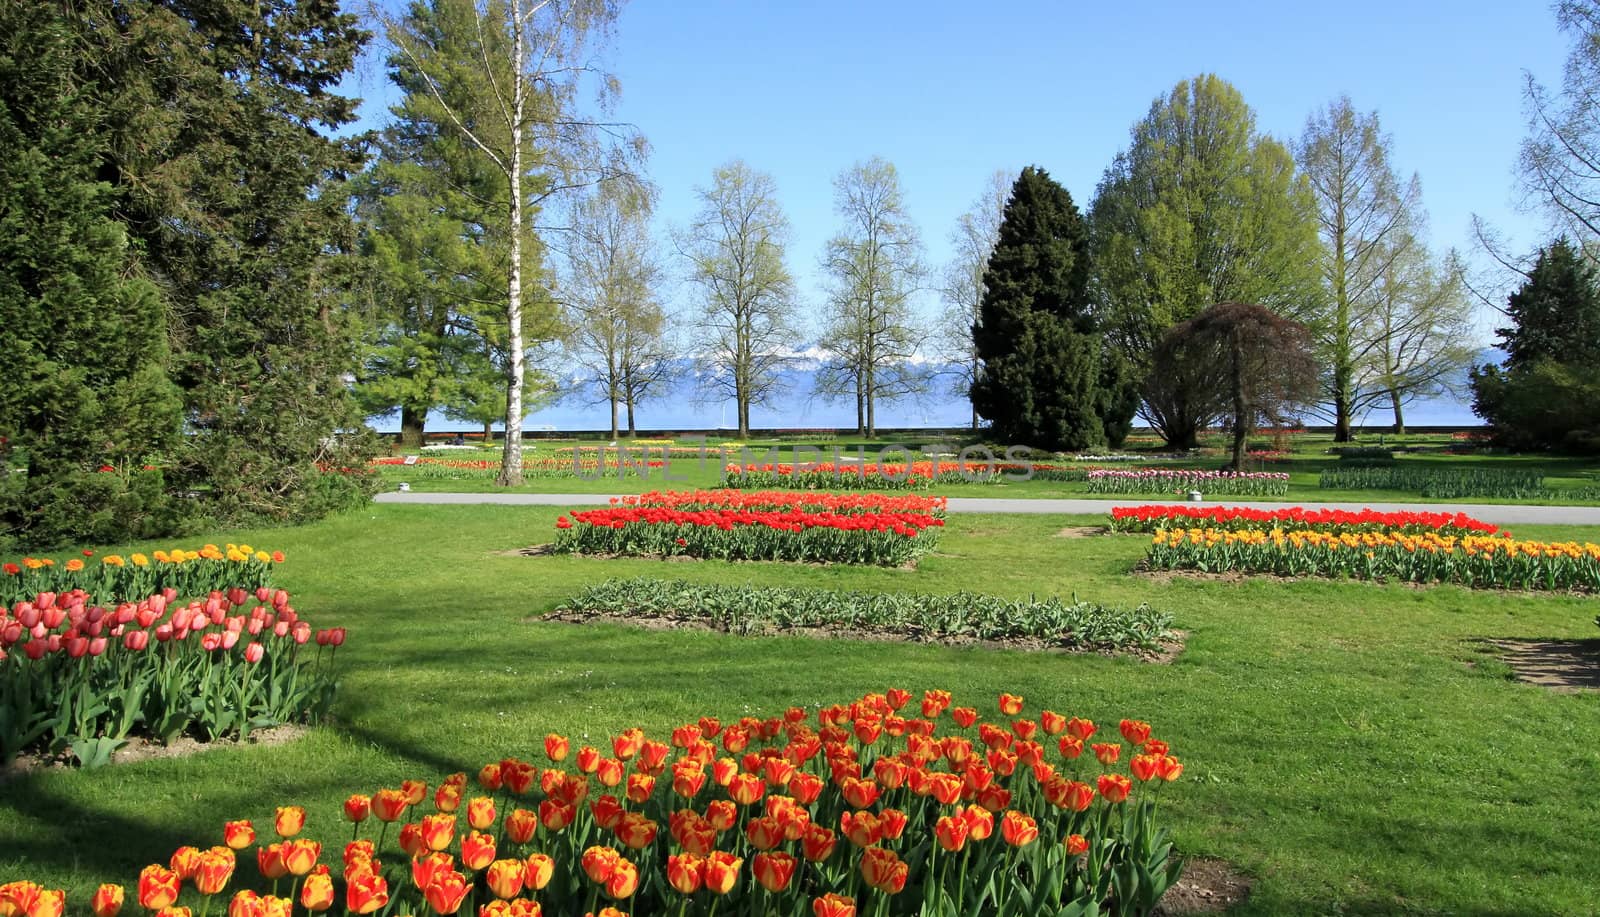 Lots of beautiful tulips for springtime Tulips feast at Park of Independance in Morges, Switzerland. See Alps mountains in the background.